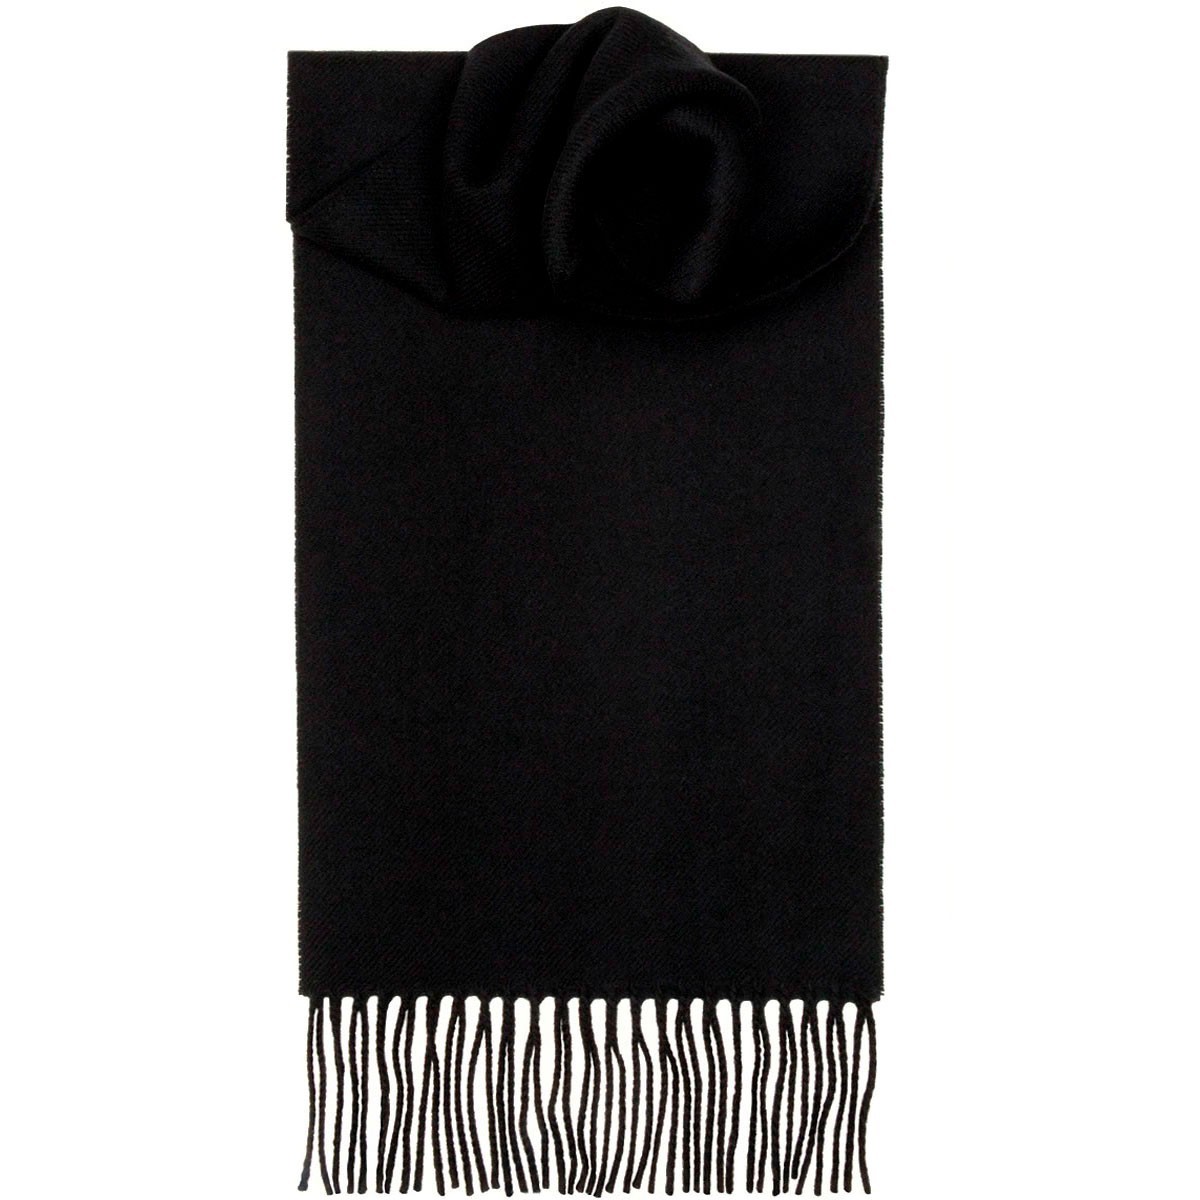 Black Plain Coloured 100% Lambswool Scarf by Lochcarron